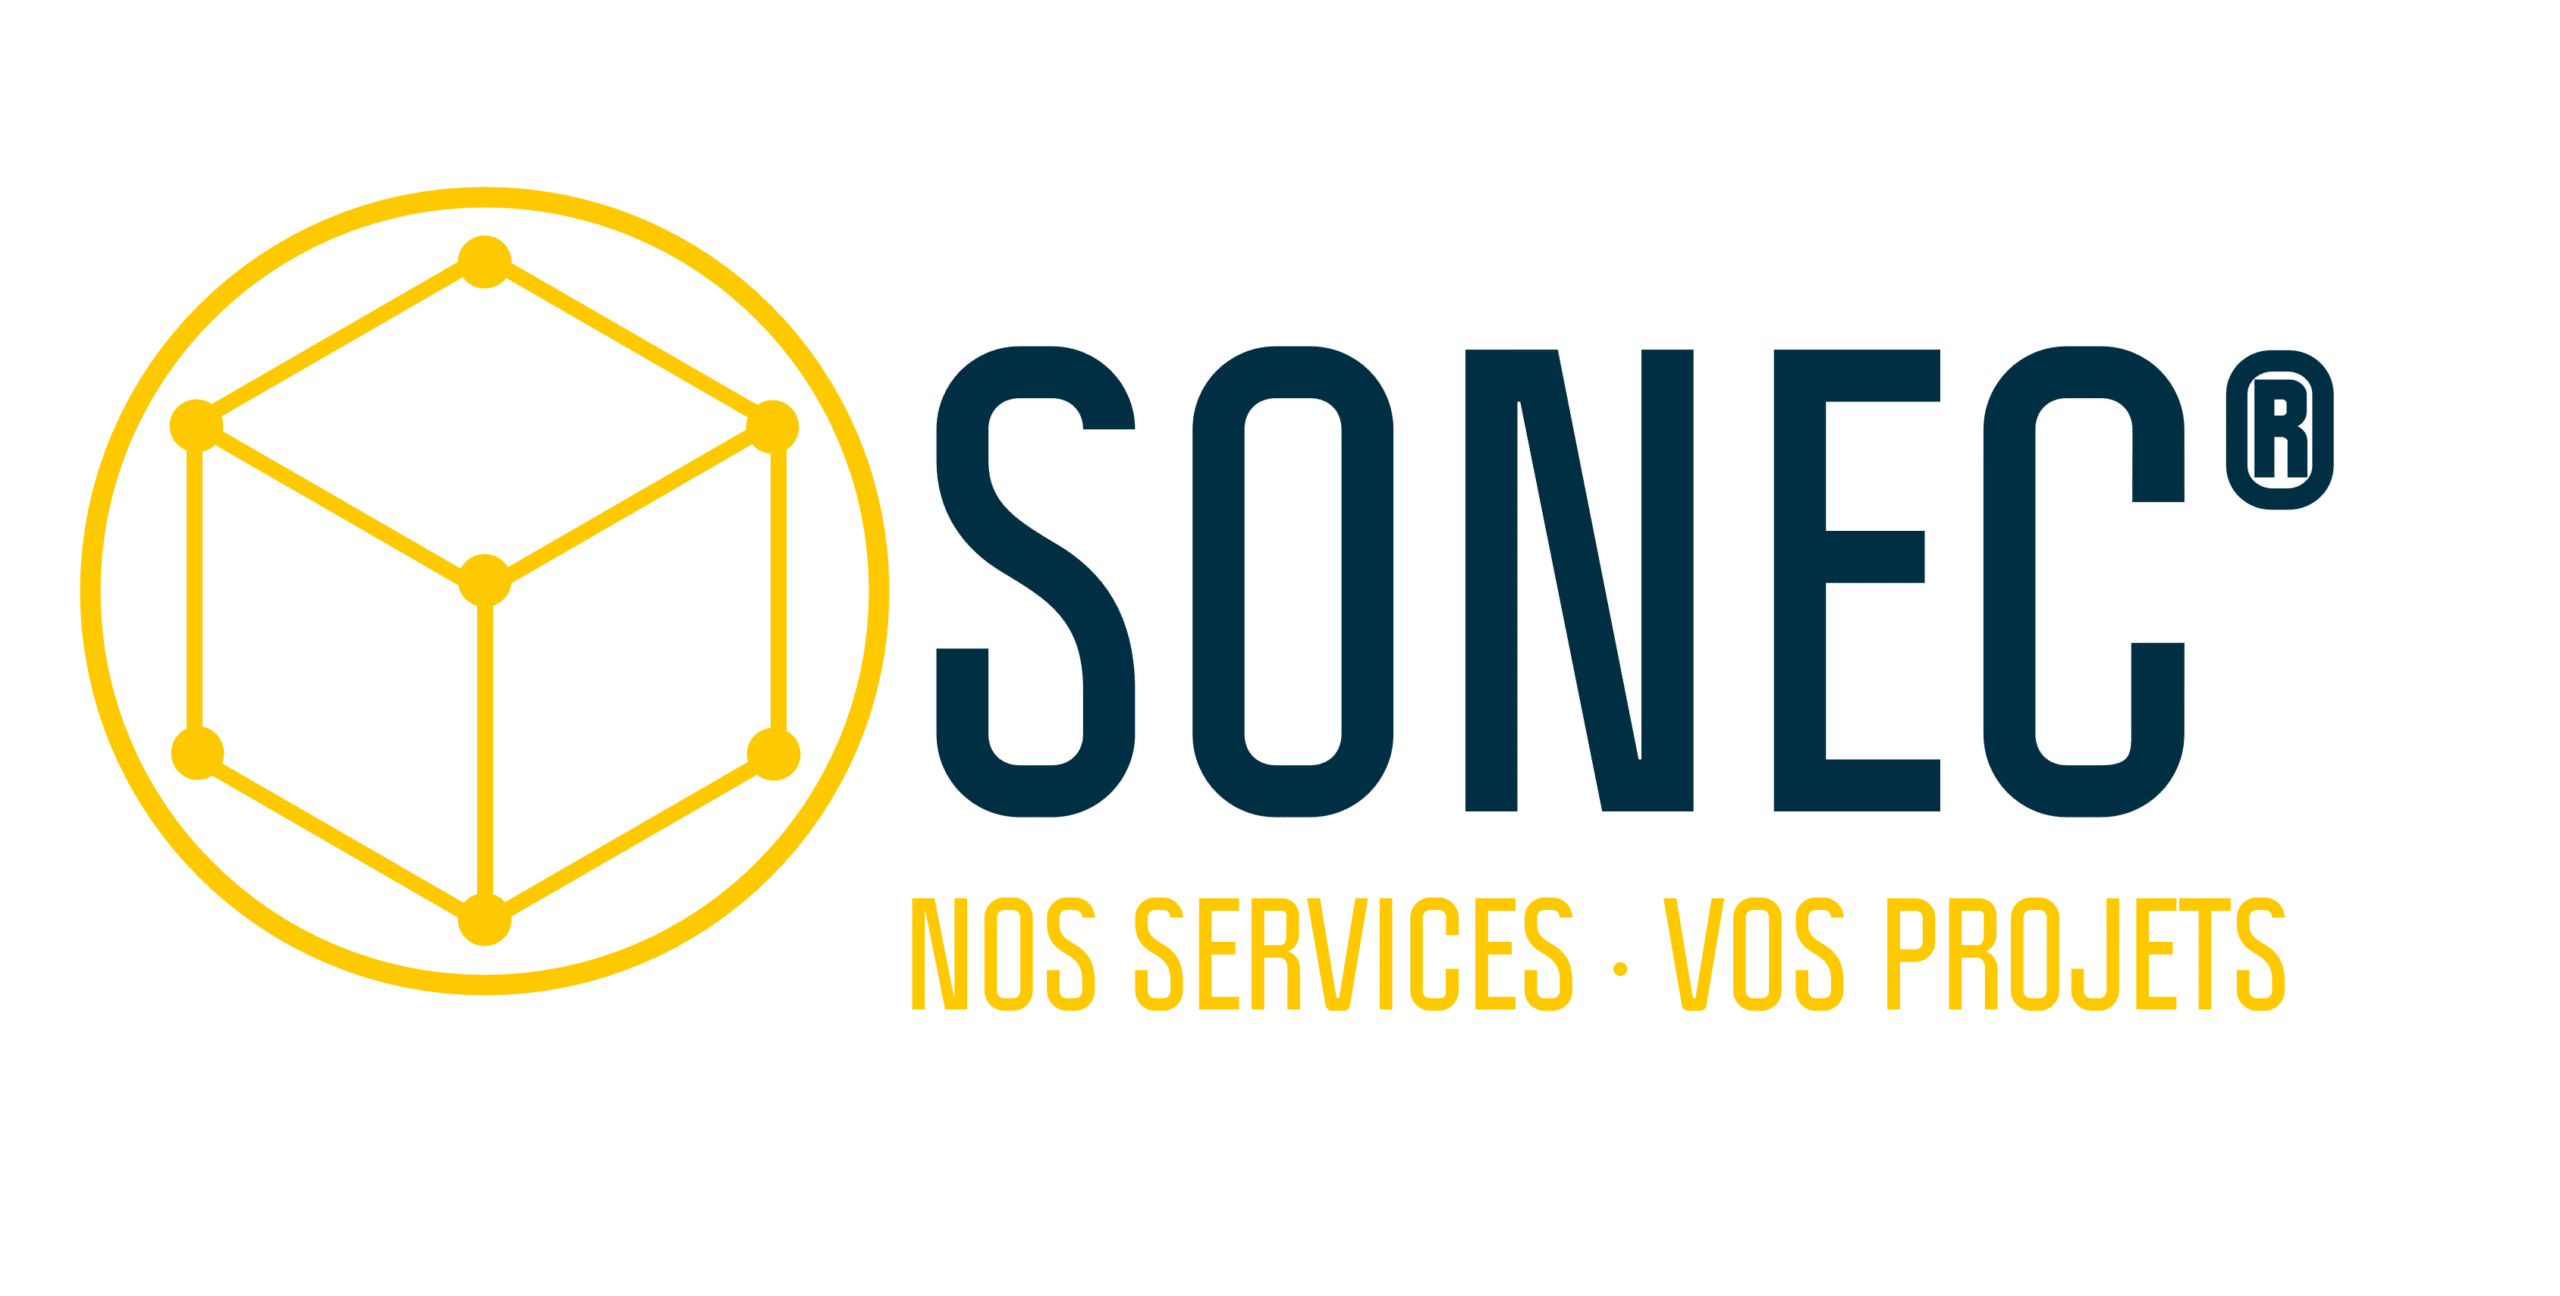 SONEC services and management of high voltage electrical projects